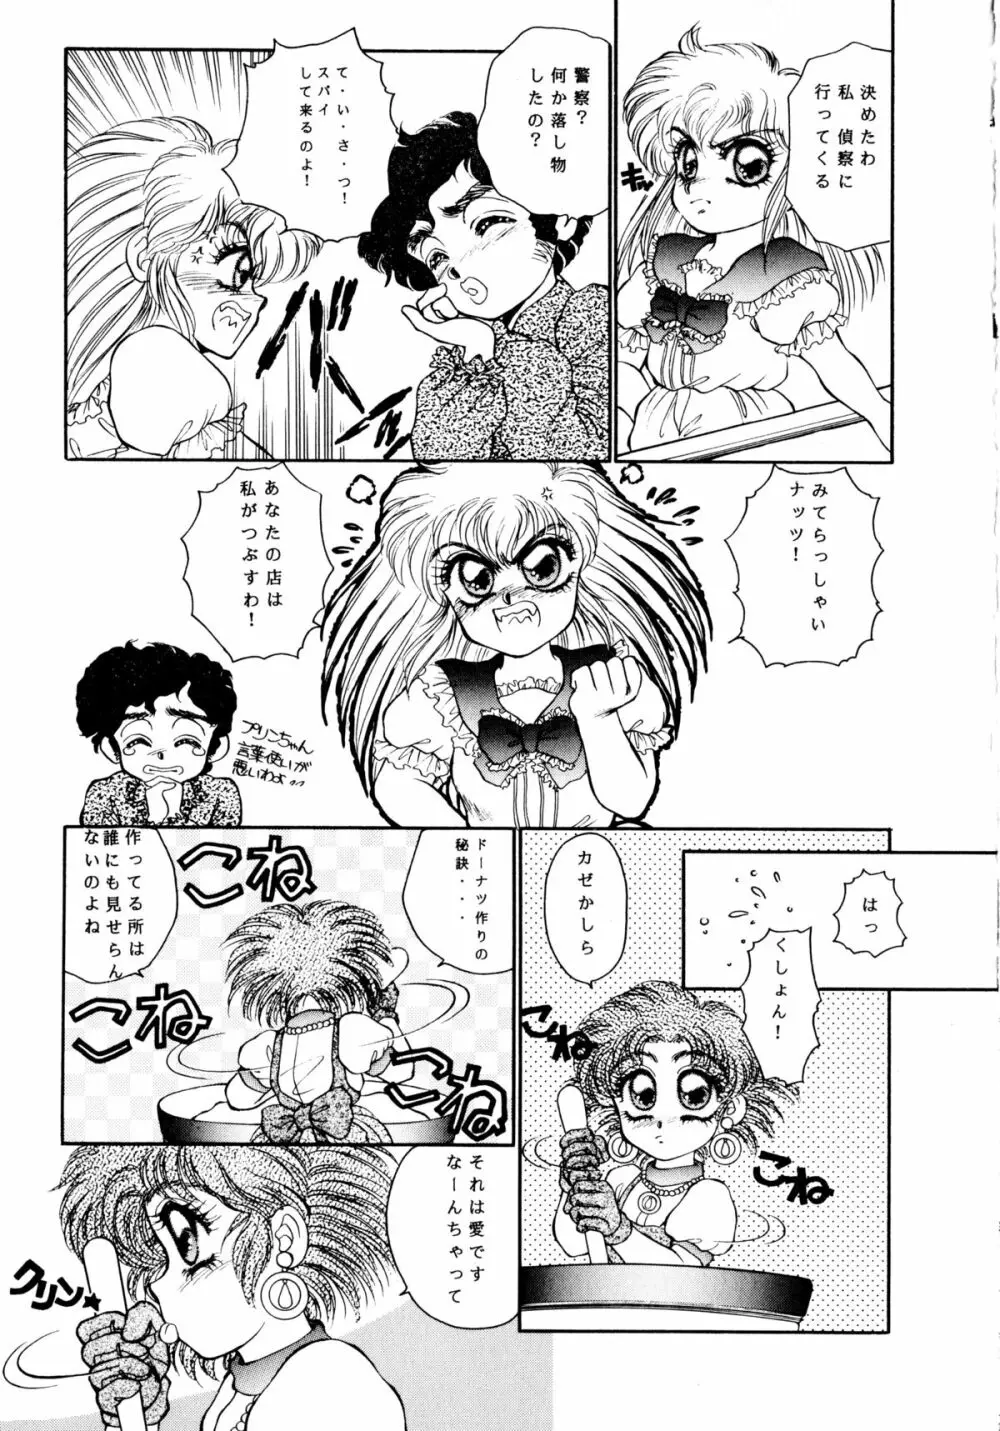 After Page.82